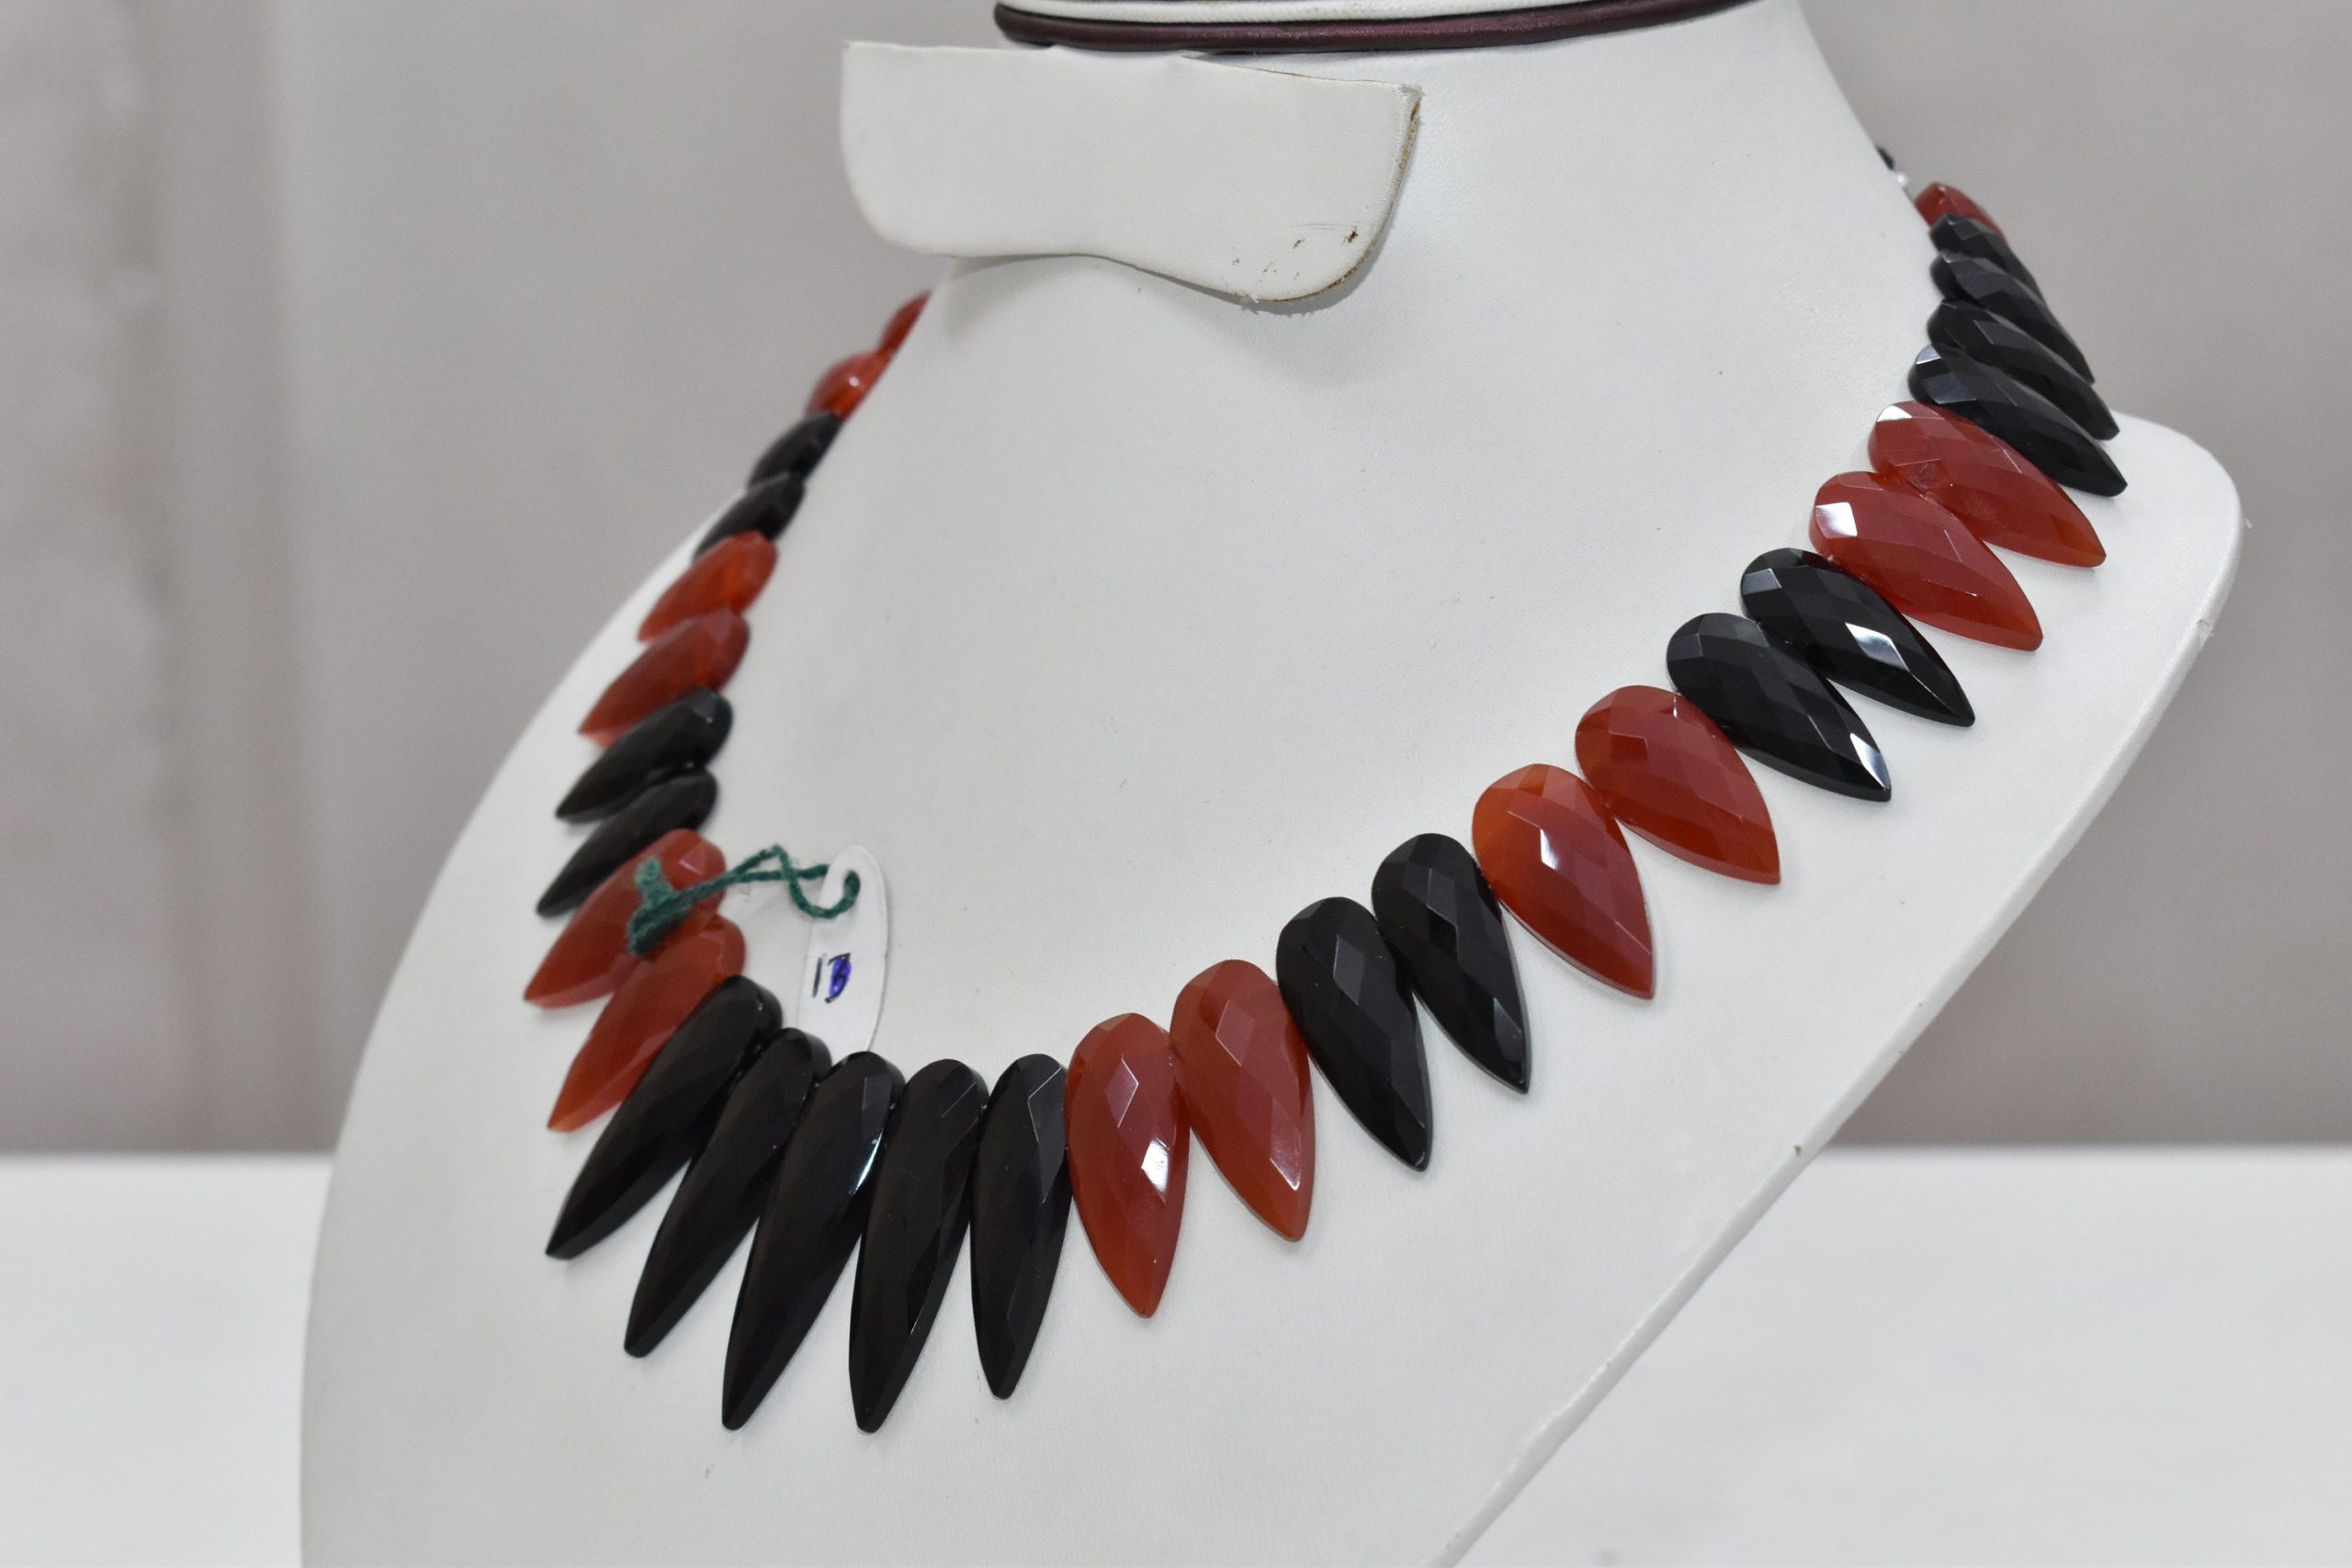 100% Natural Onyx Handmade Necklace,Collar Necklace,Princess Necklace,Choker Necklace,Bib Necklace,Matinee Necklace,Handicraft Necklace. | Save 33% - Rajasthan Living 13